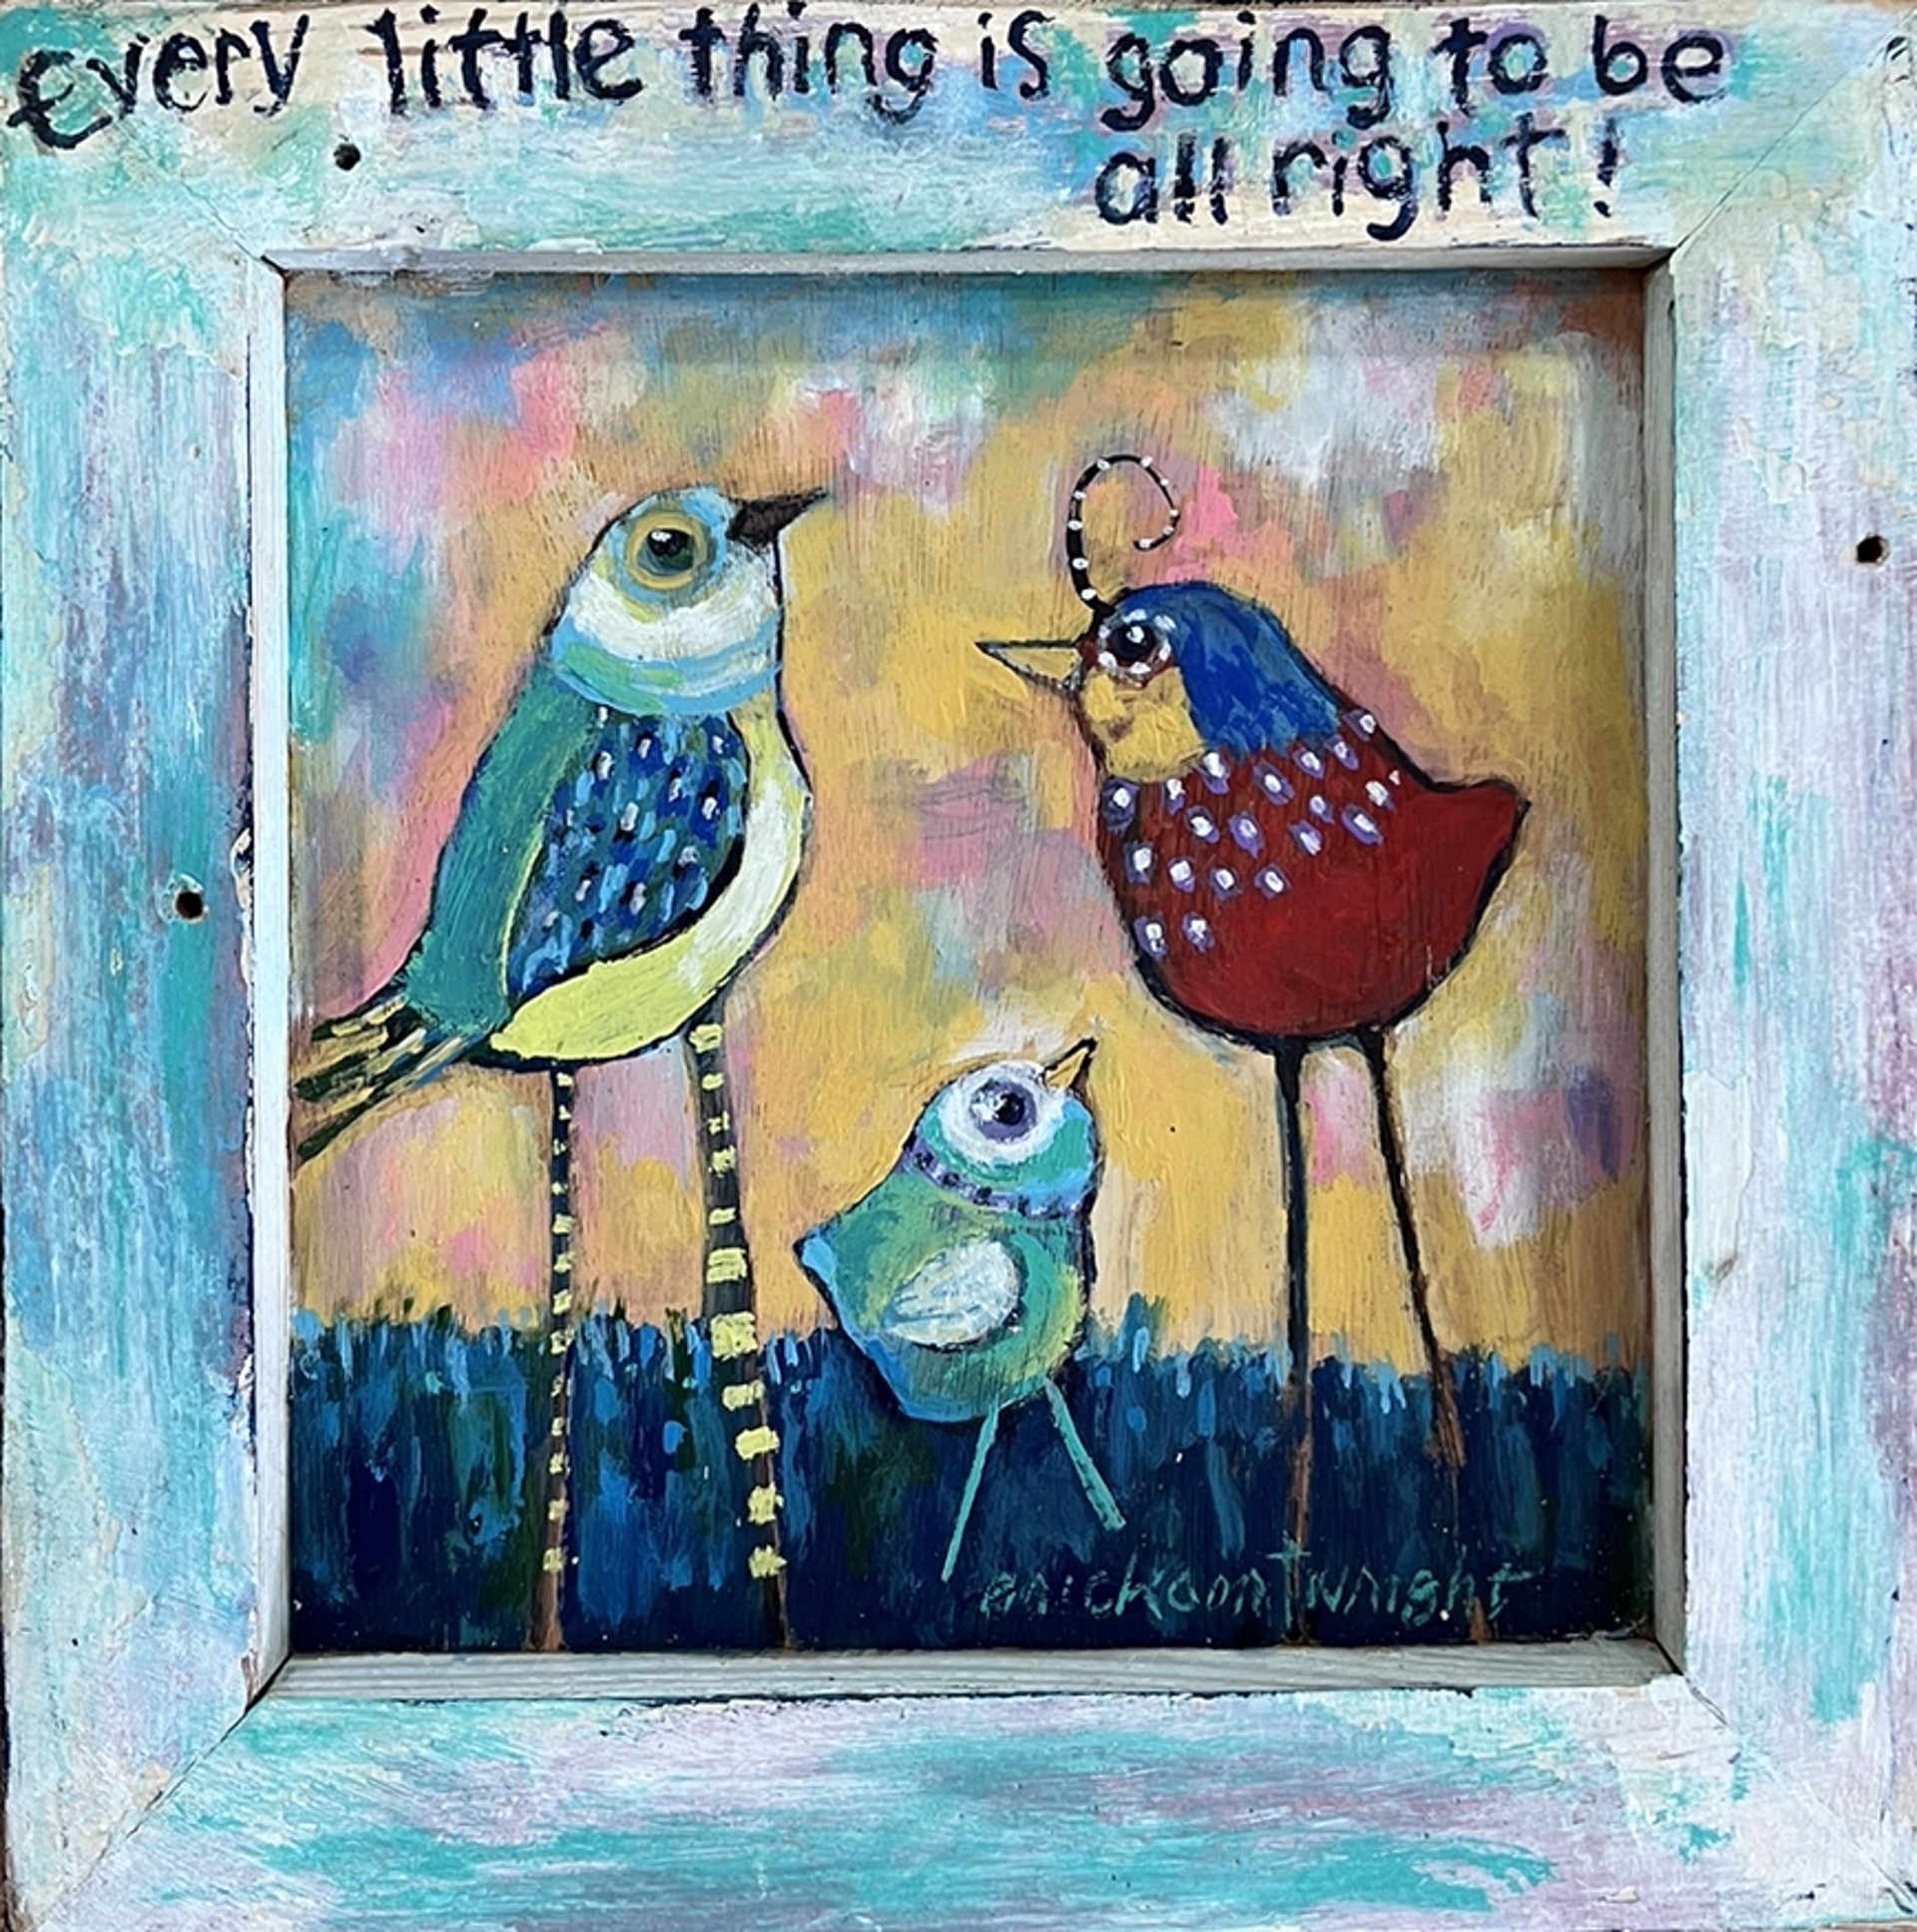 Every Little Thing is Going to be Alright by Sandra Erickson Wright